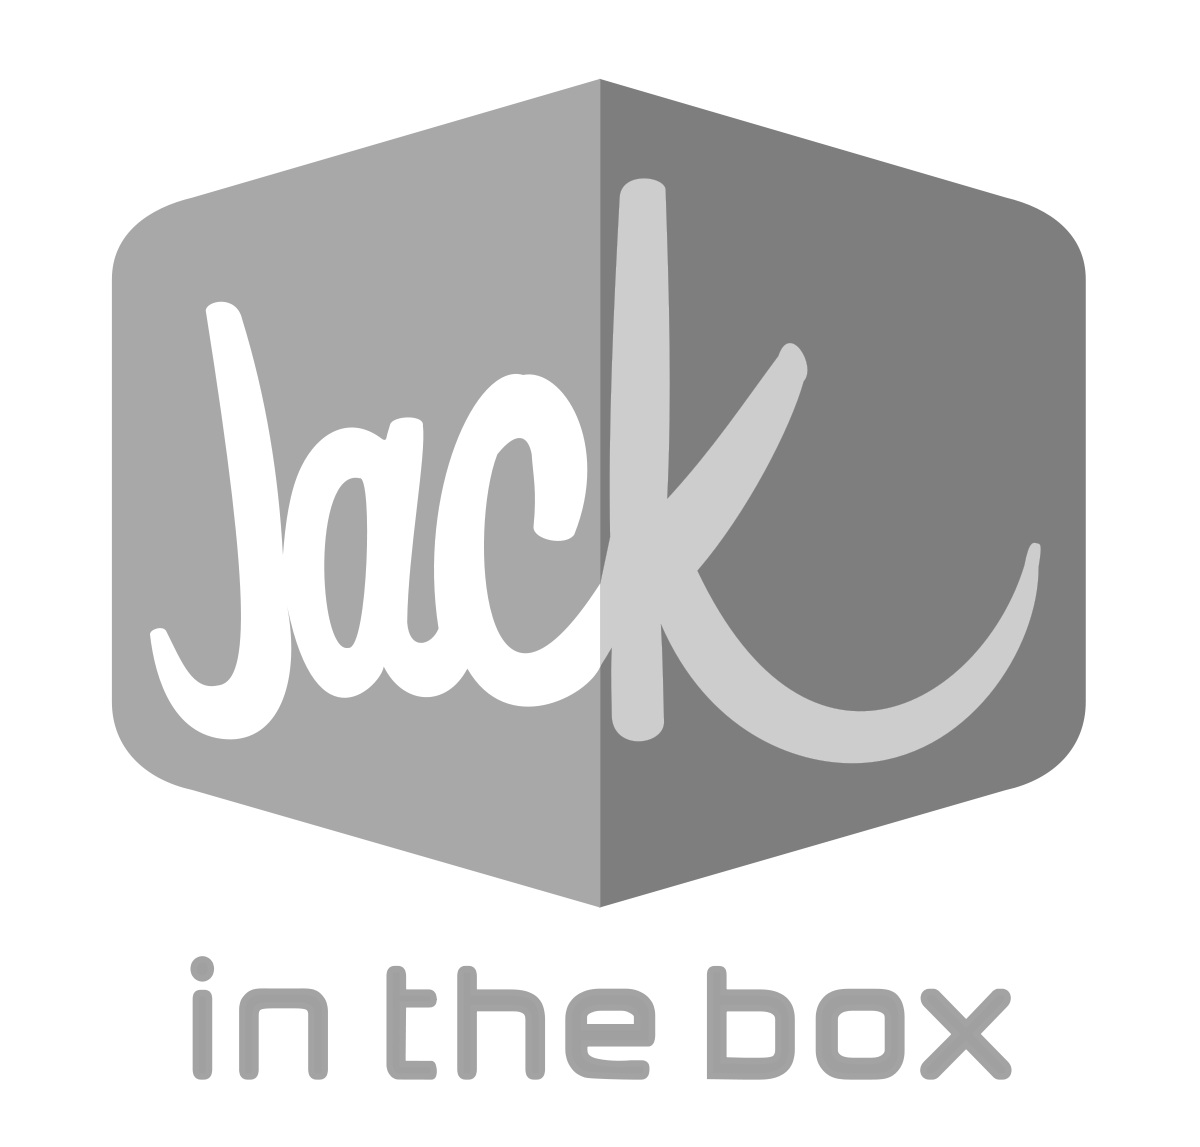 1200px-Jack_in_the_Box_2009_logo.svg.png